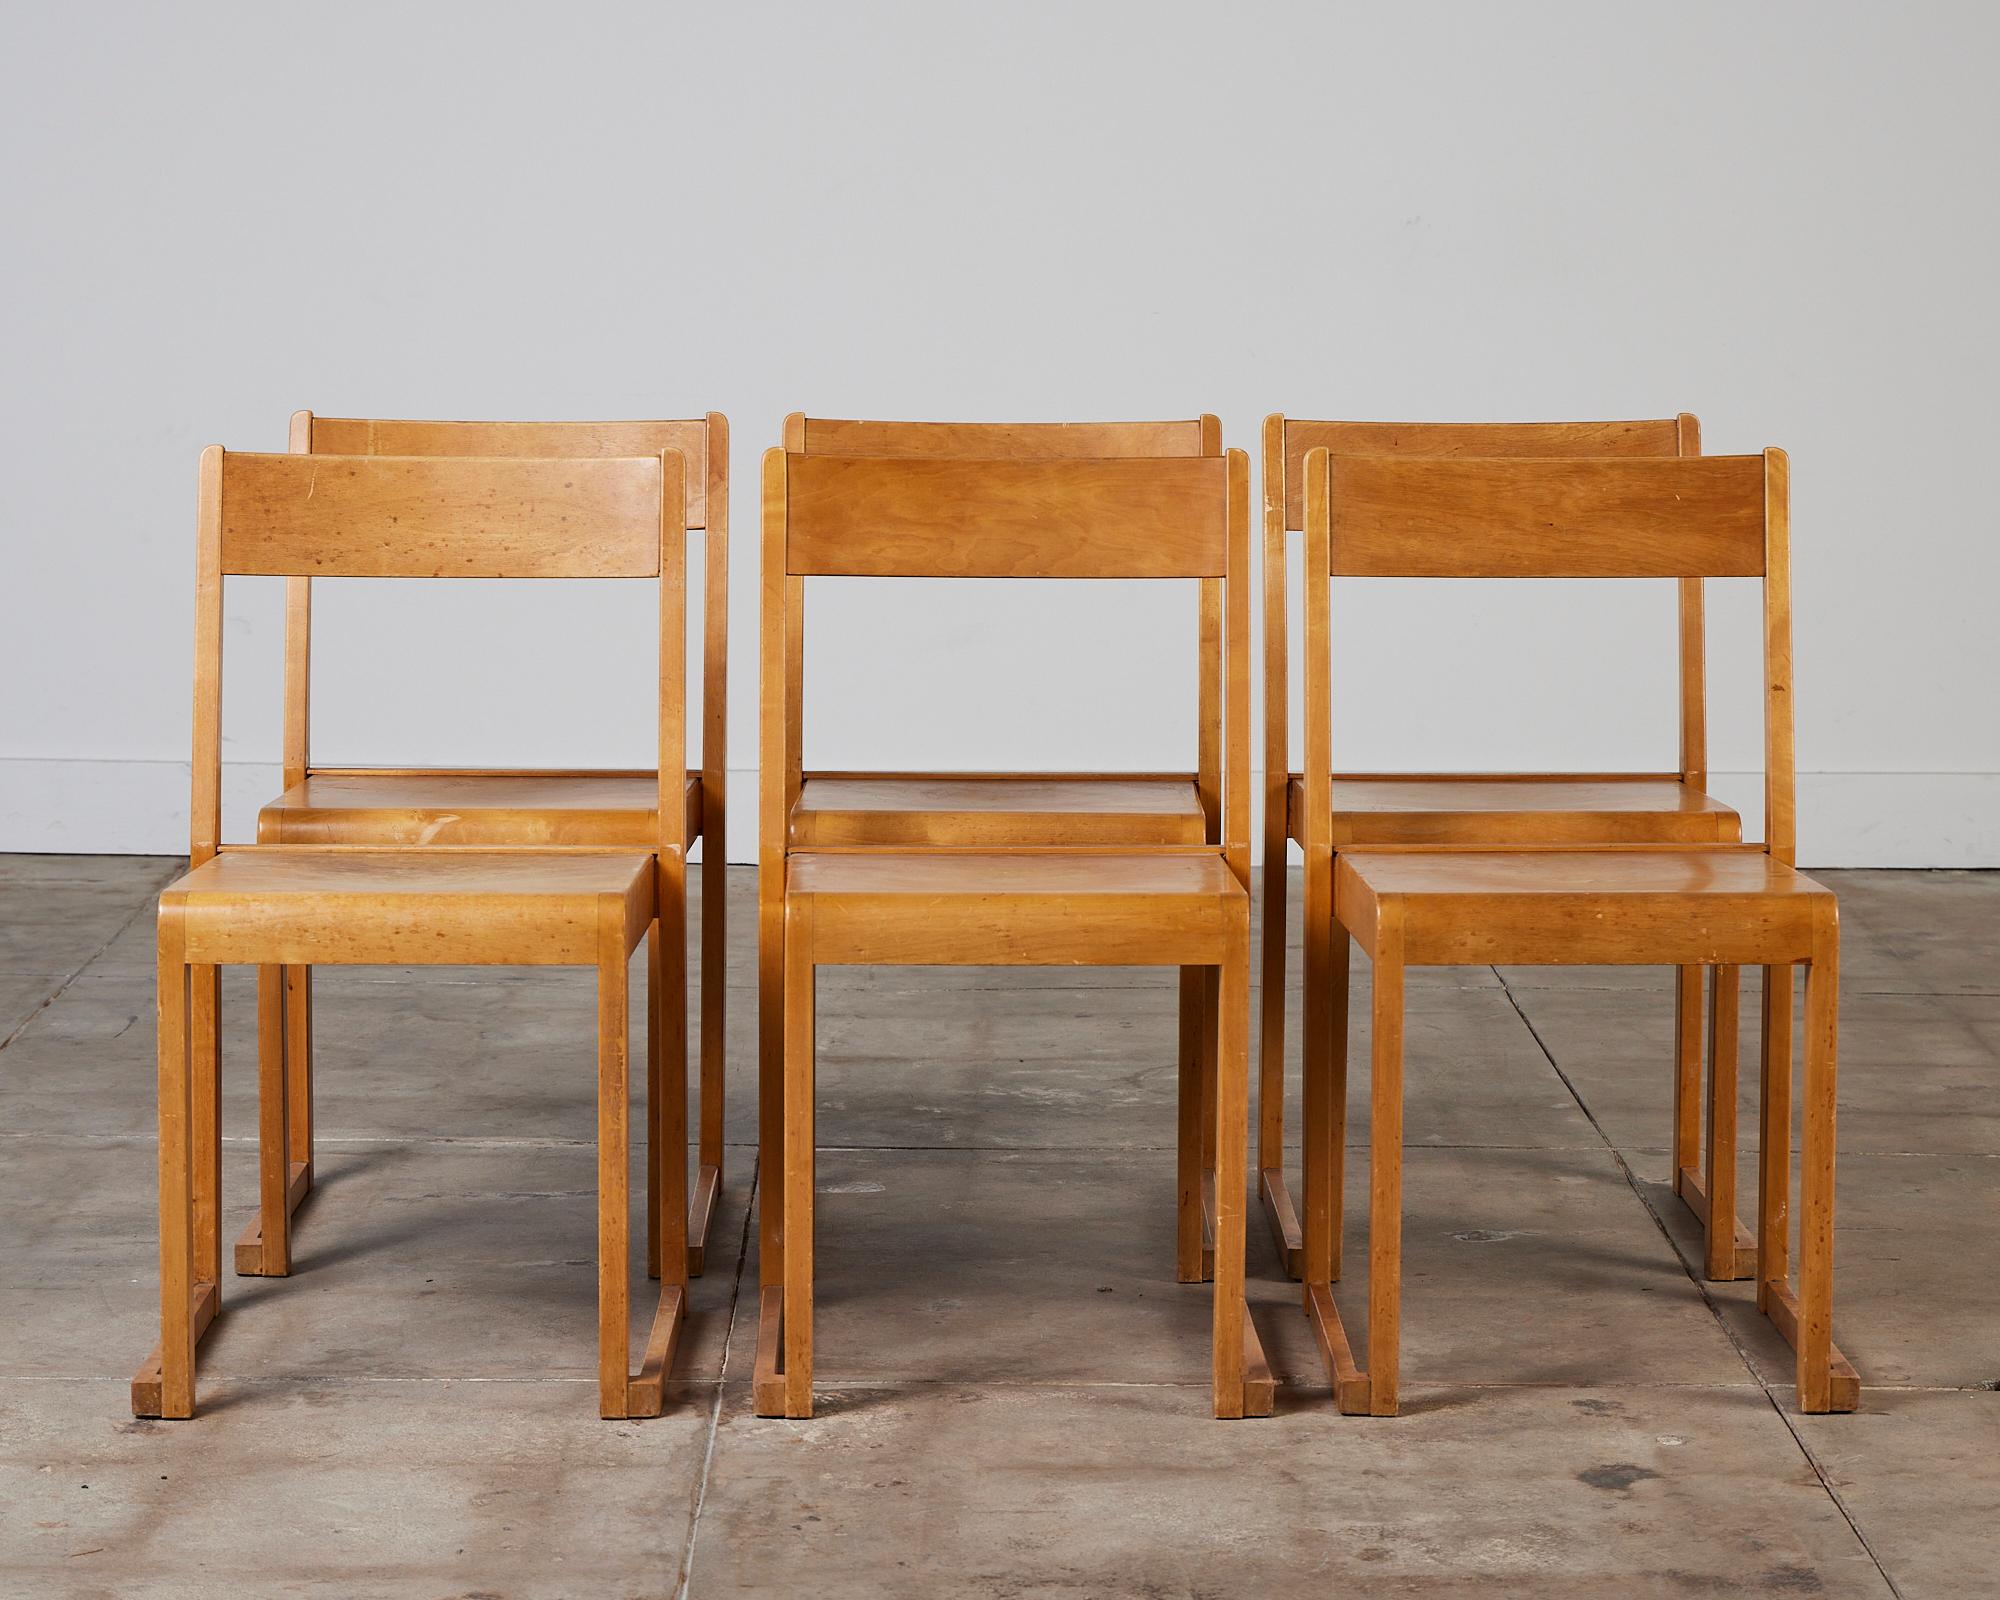 Set of six chairs by Sven Markelius, Sweden, c.1930s. These chairs feature a minimalist modern design, the chair backs are composed of hardwood birch while the seat is made up of bent plywood. The chairs were originally designed for the Helsingborg